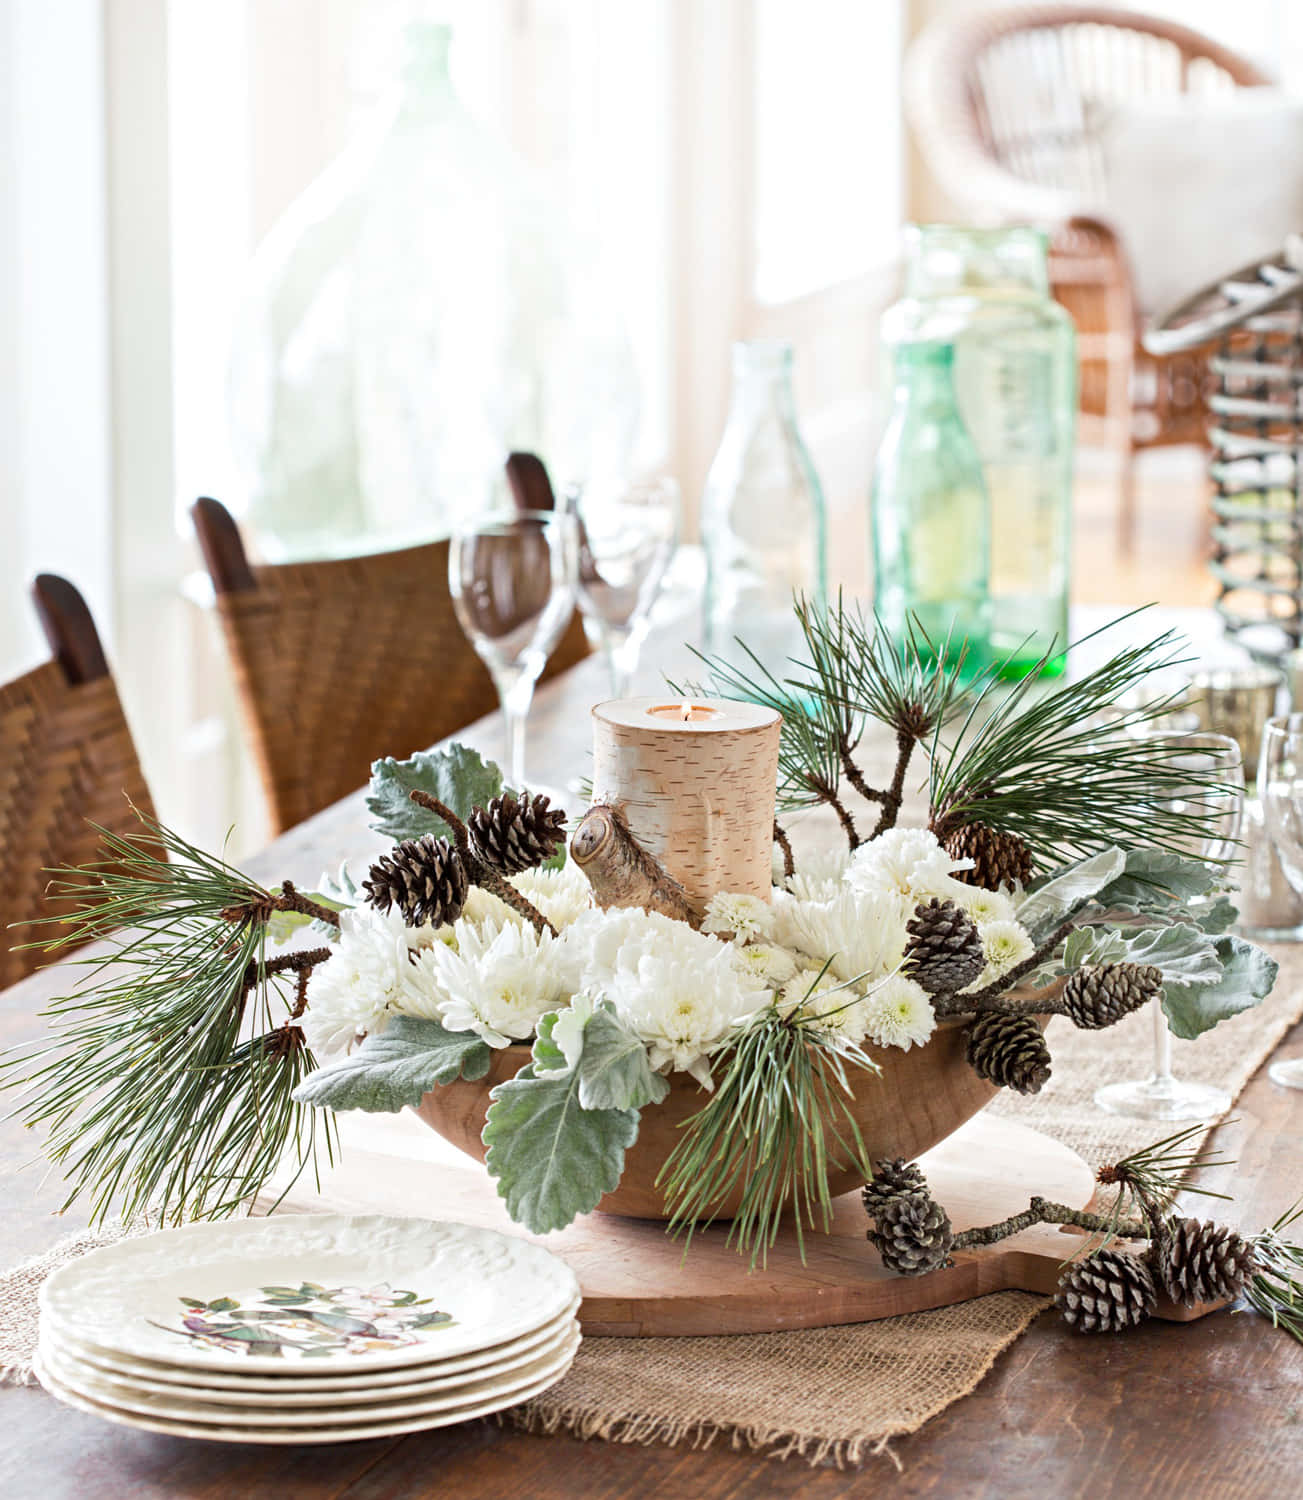 Give Any Table a Refreshing Look with a Charming Centerpiece Wallpaper